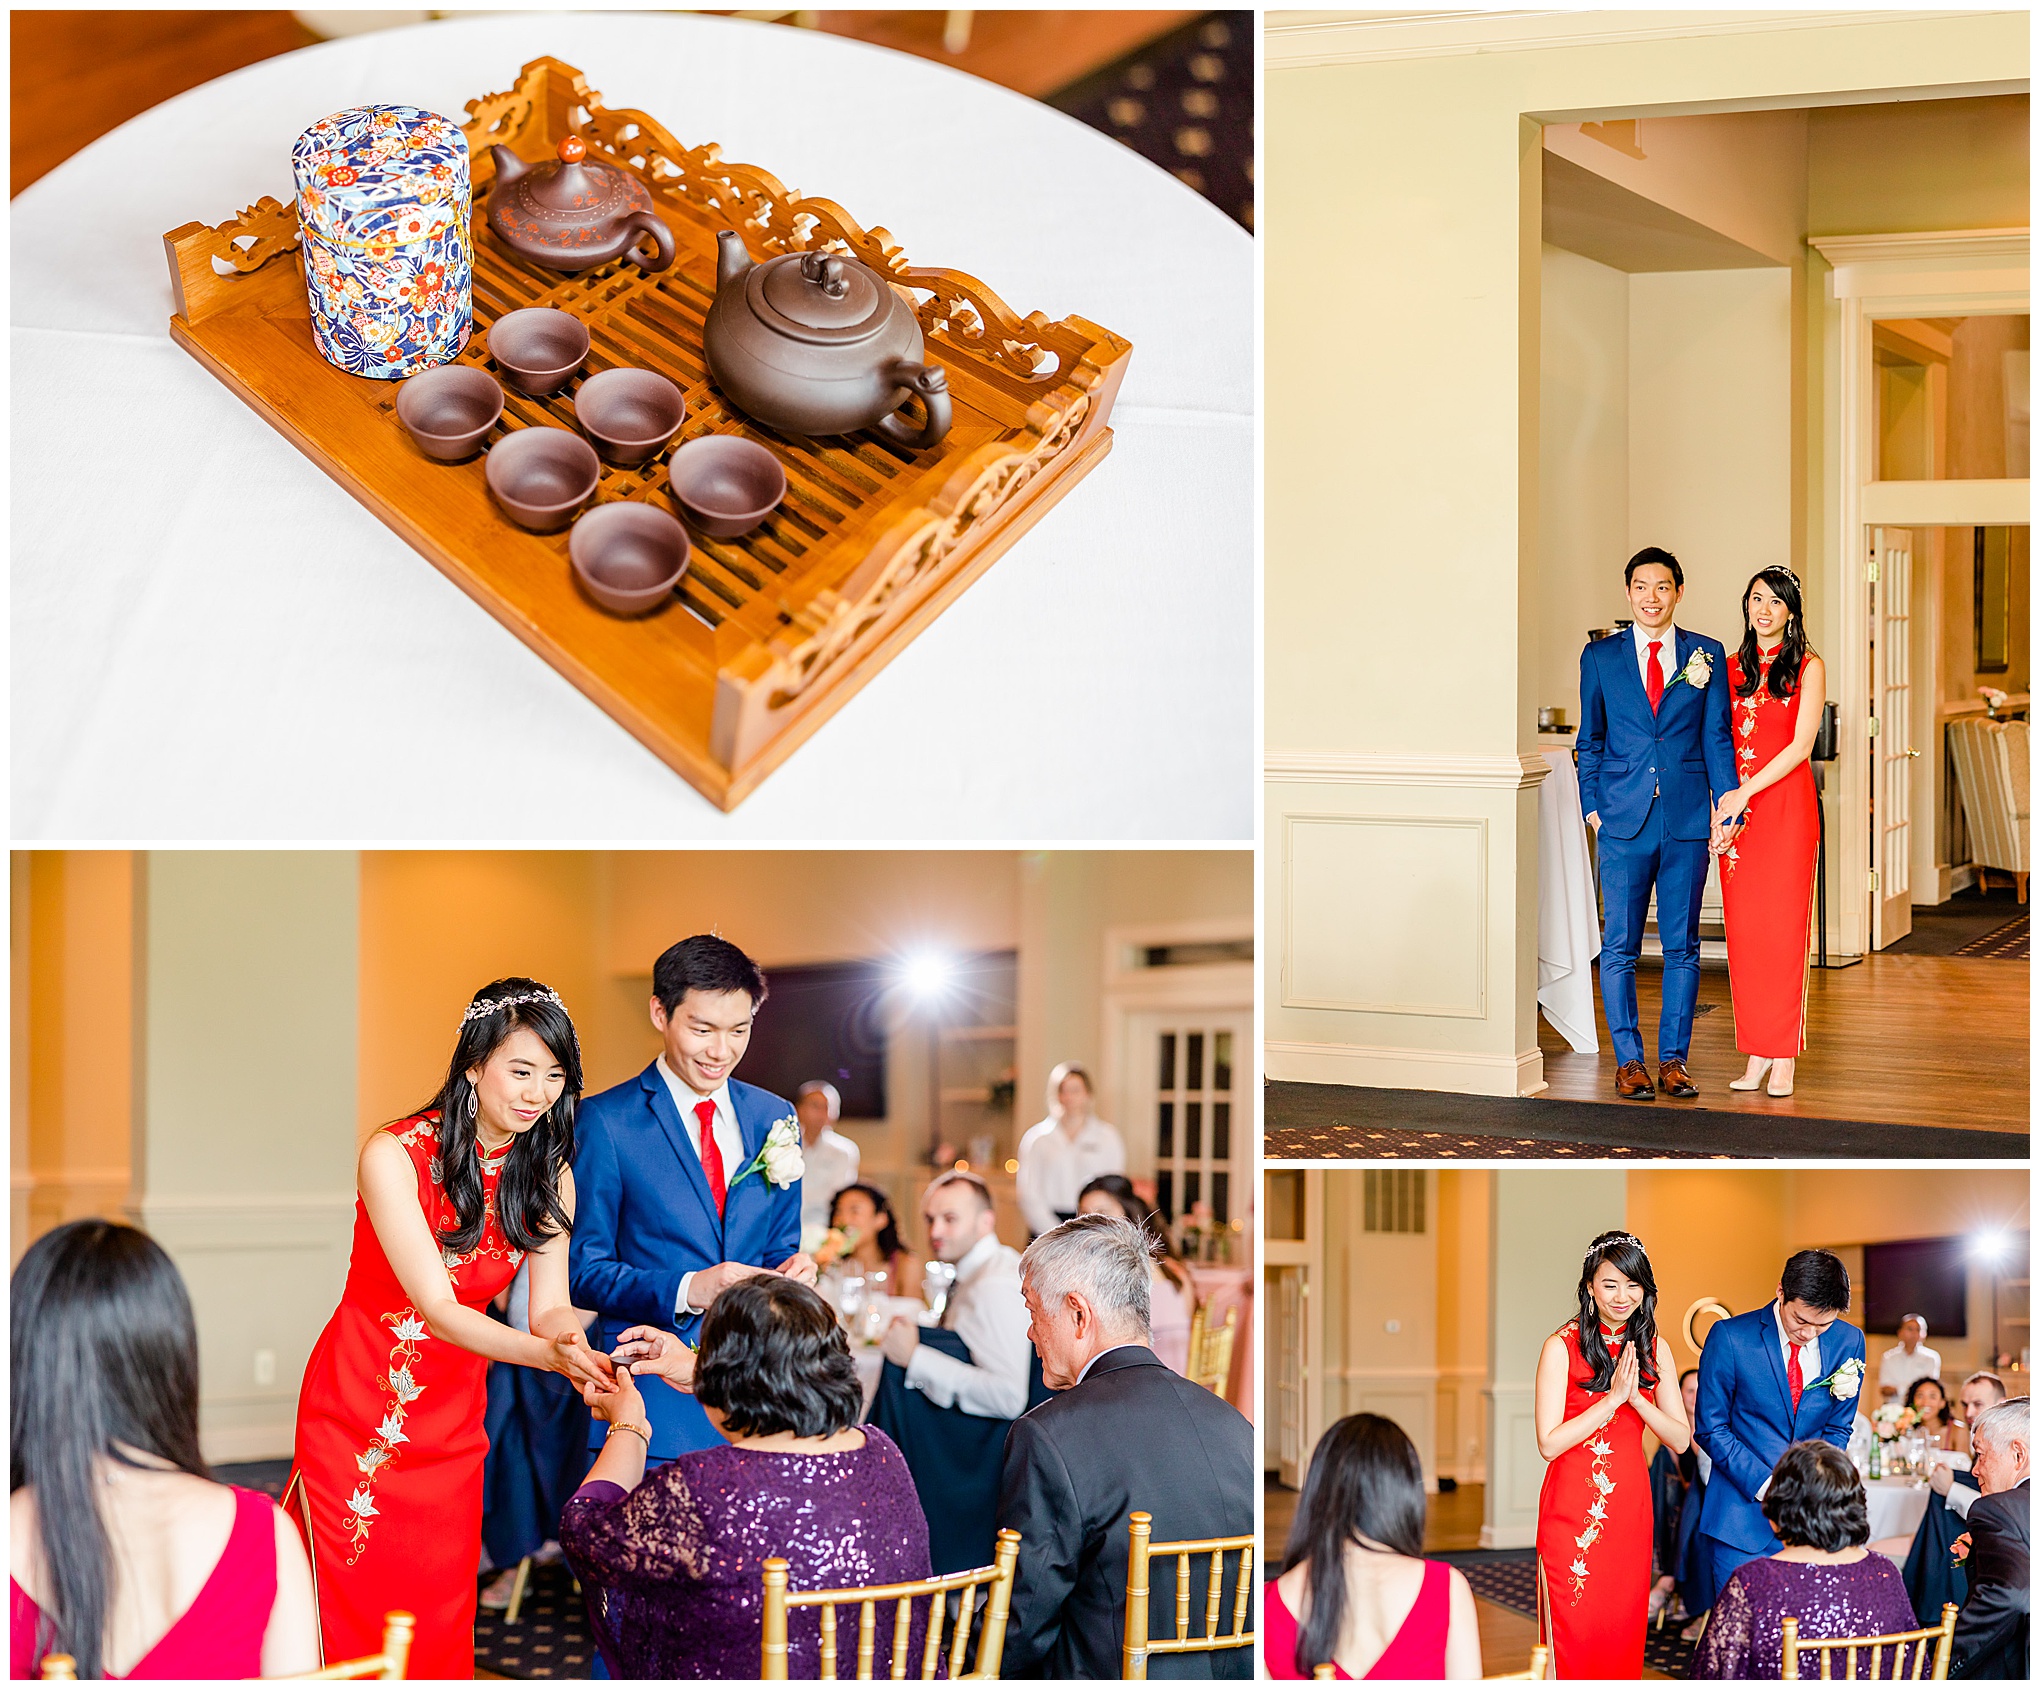 spring Westfields Golf Club wedding, Clifton Virginia wedding, northern Virginia wedding venue, DC wedding photographer, DC photographer, Virginia country club wedding, spring wedding aesthetic, Chinese American wedding, Rachel E.H.Photography, teapots, bride and groom with teacups